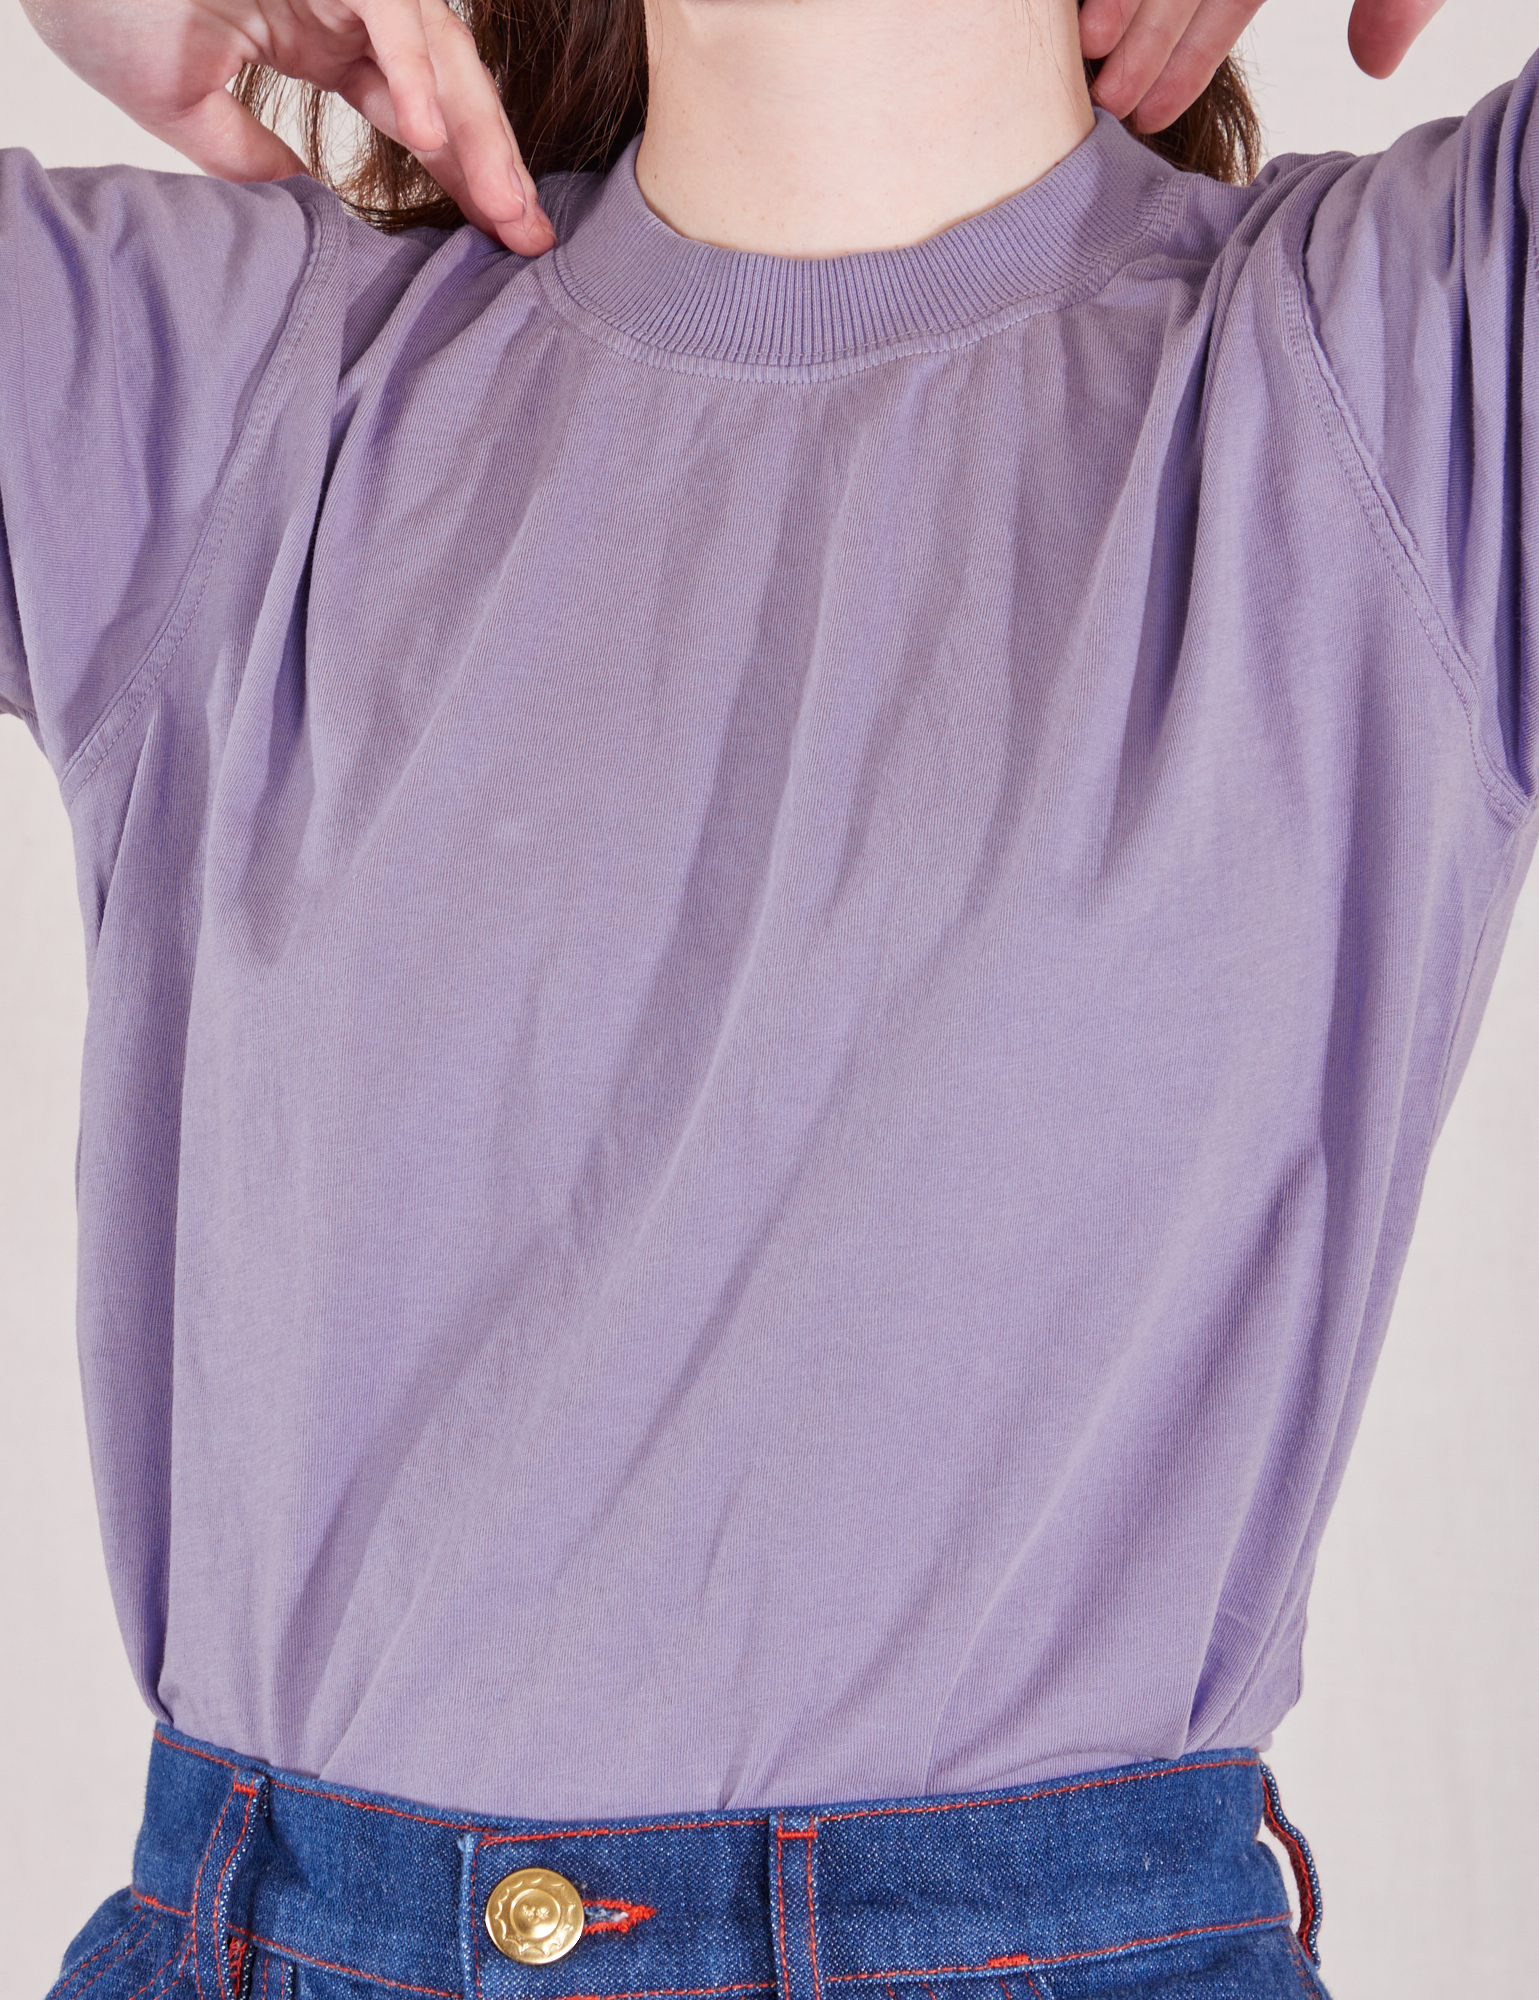 Organic Vintage Tee in Faded Grape front close up on Hana